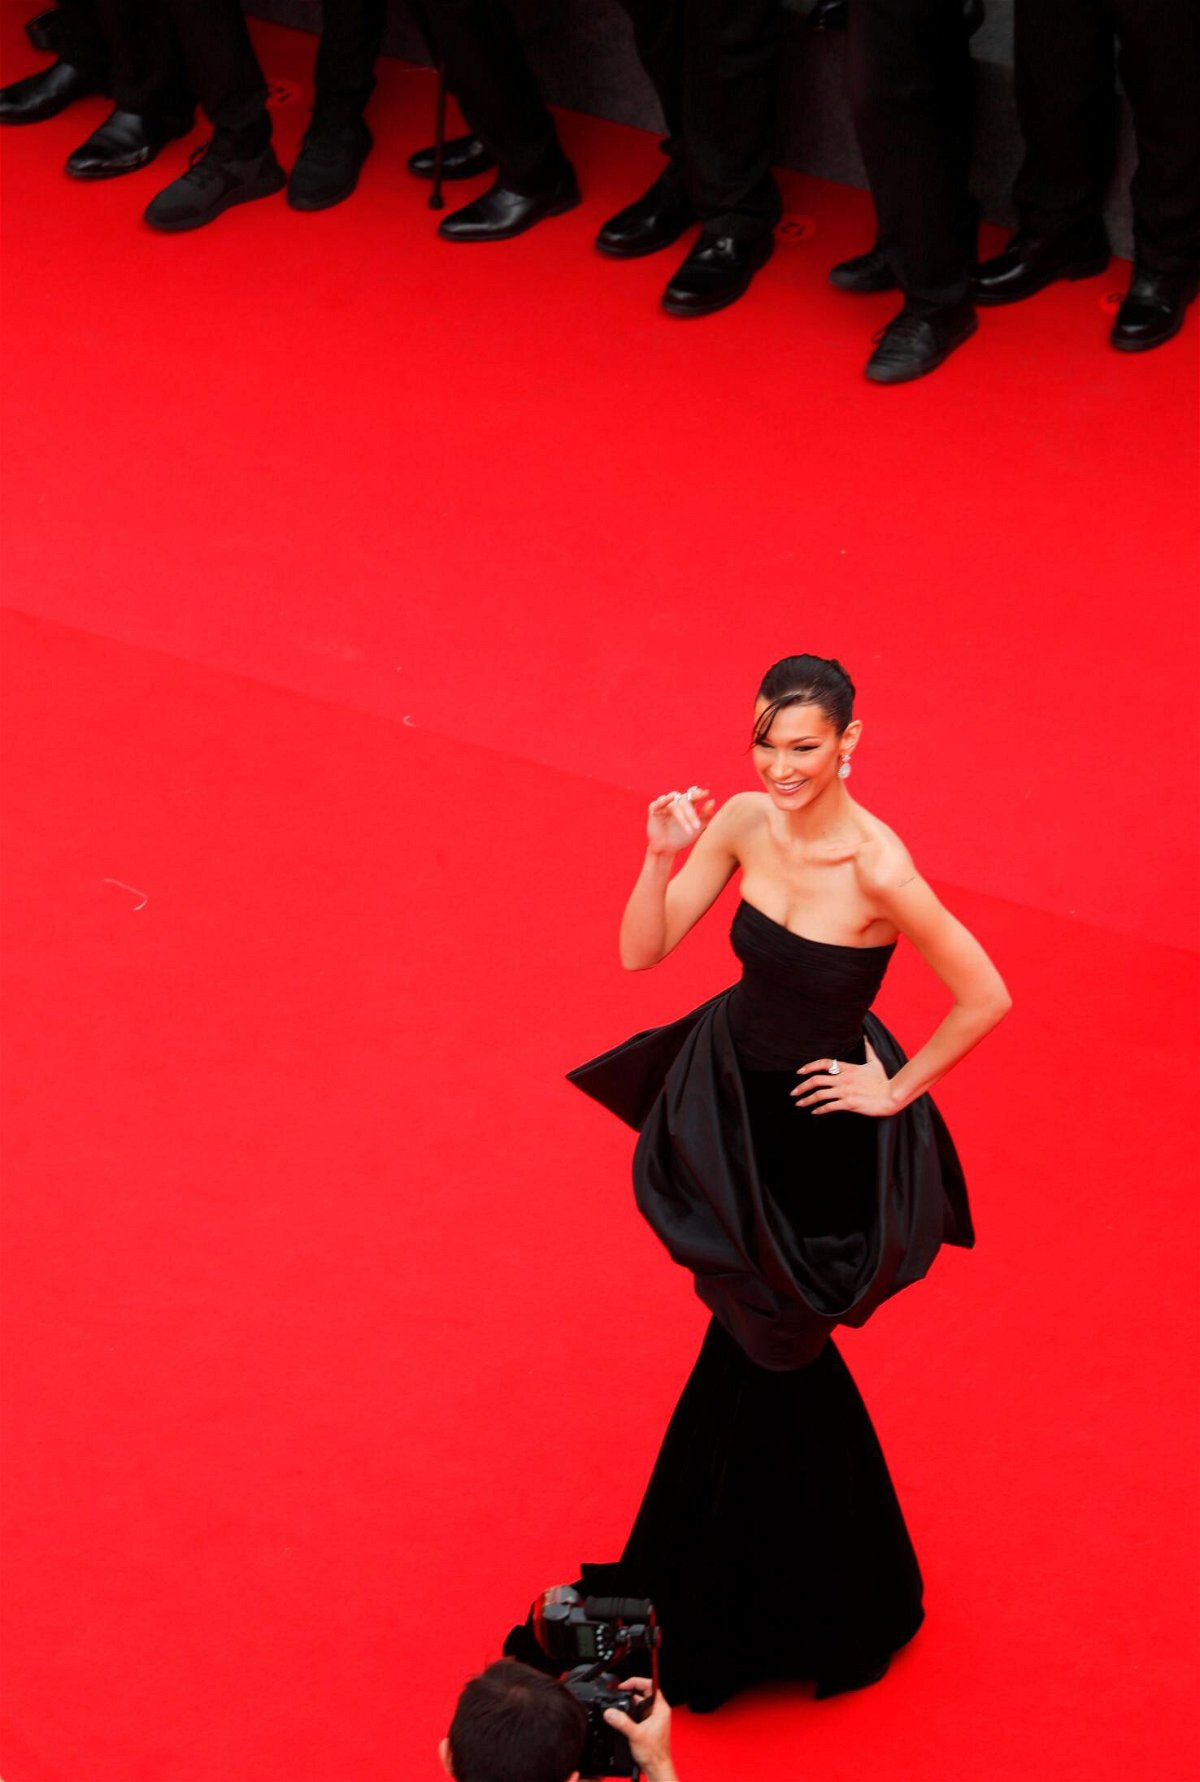 <i>Pool/Getty Images Europe/Getty Images</i><br/>Cannes 2022 best red carpet fashion includes Bella Hadid.